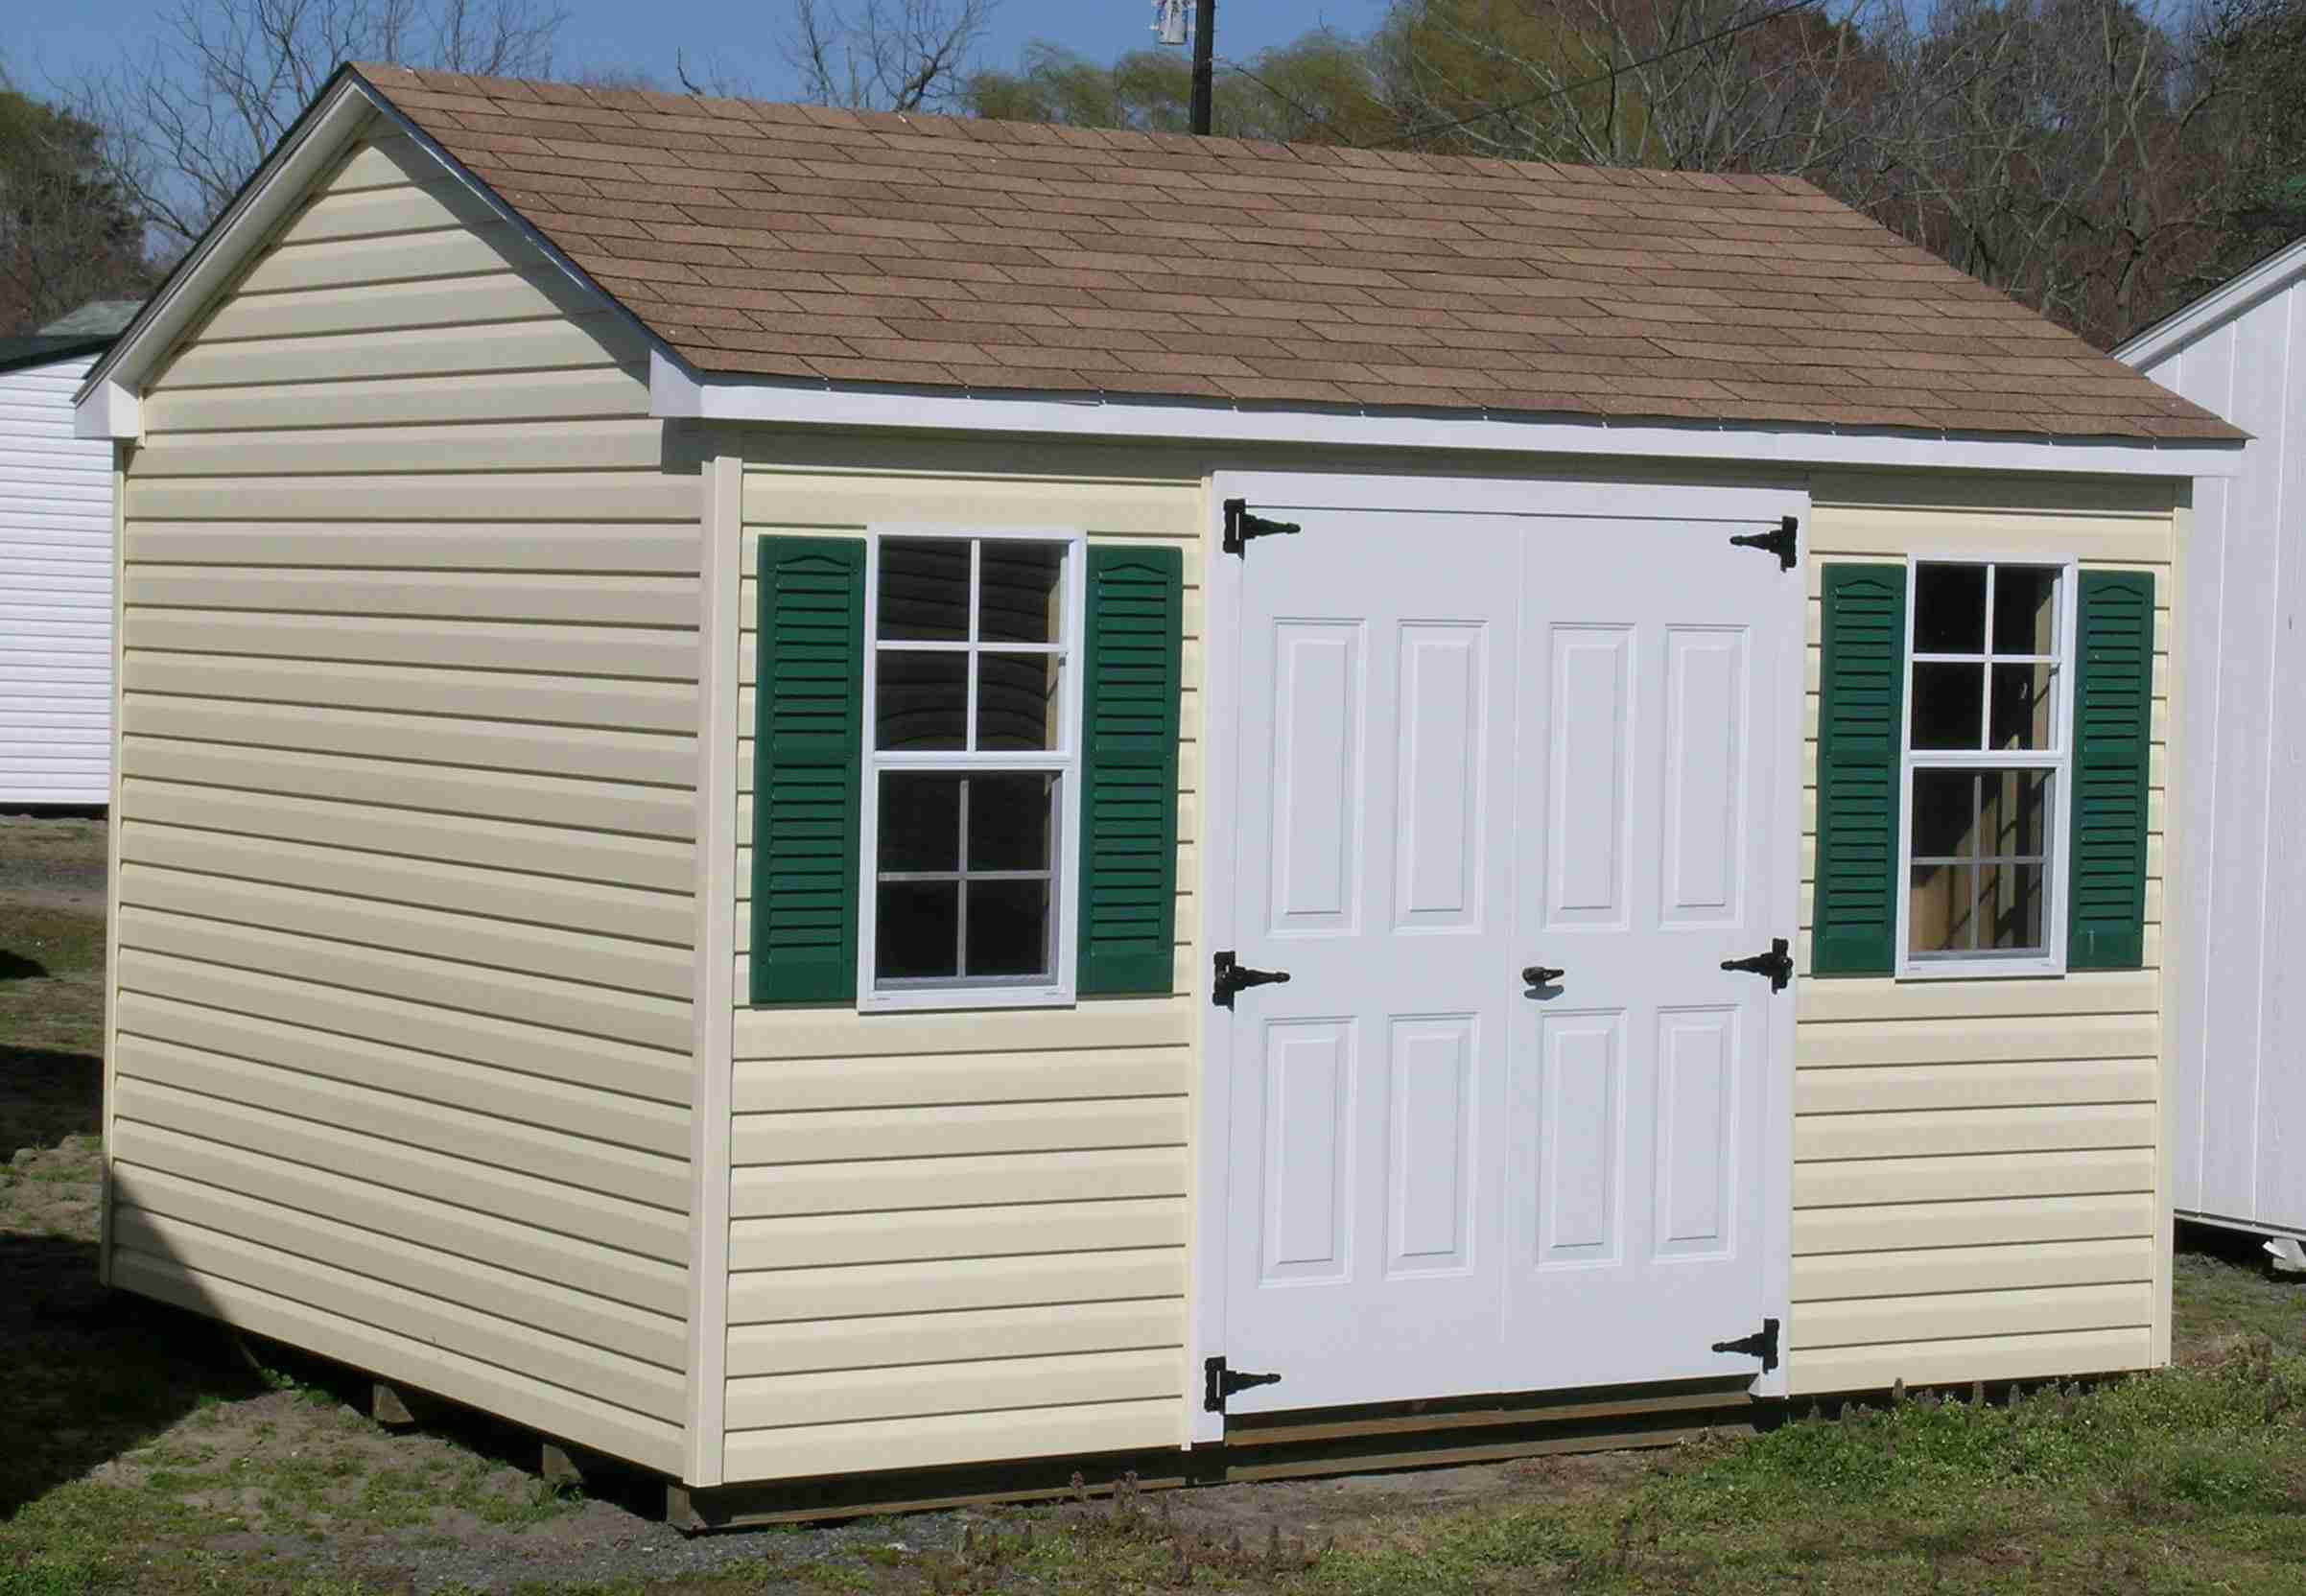 A-frame storage shed with yellow vinyl siding